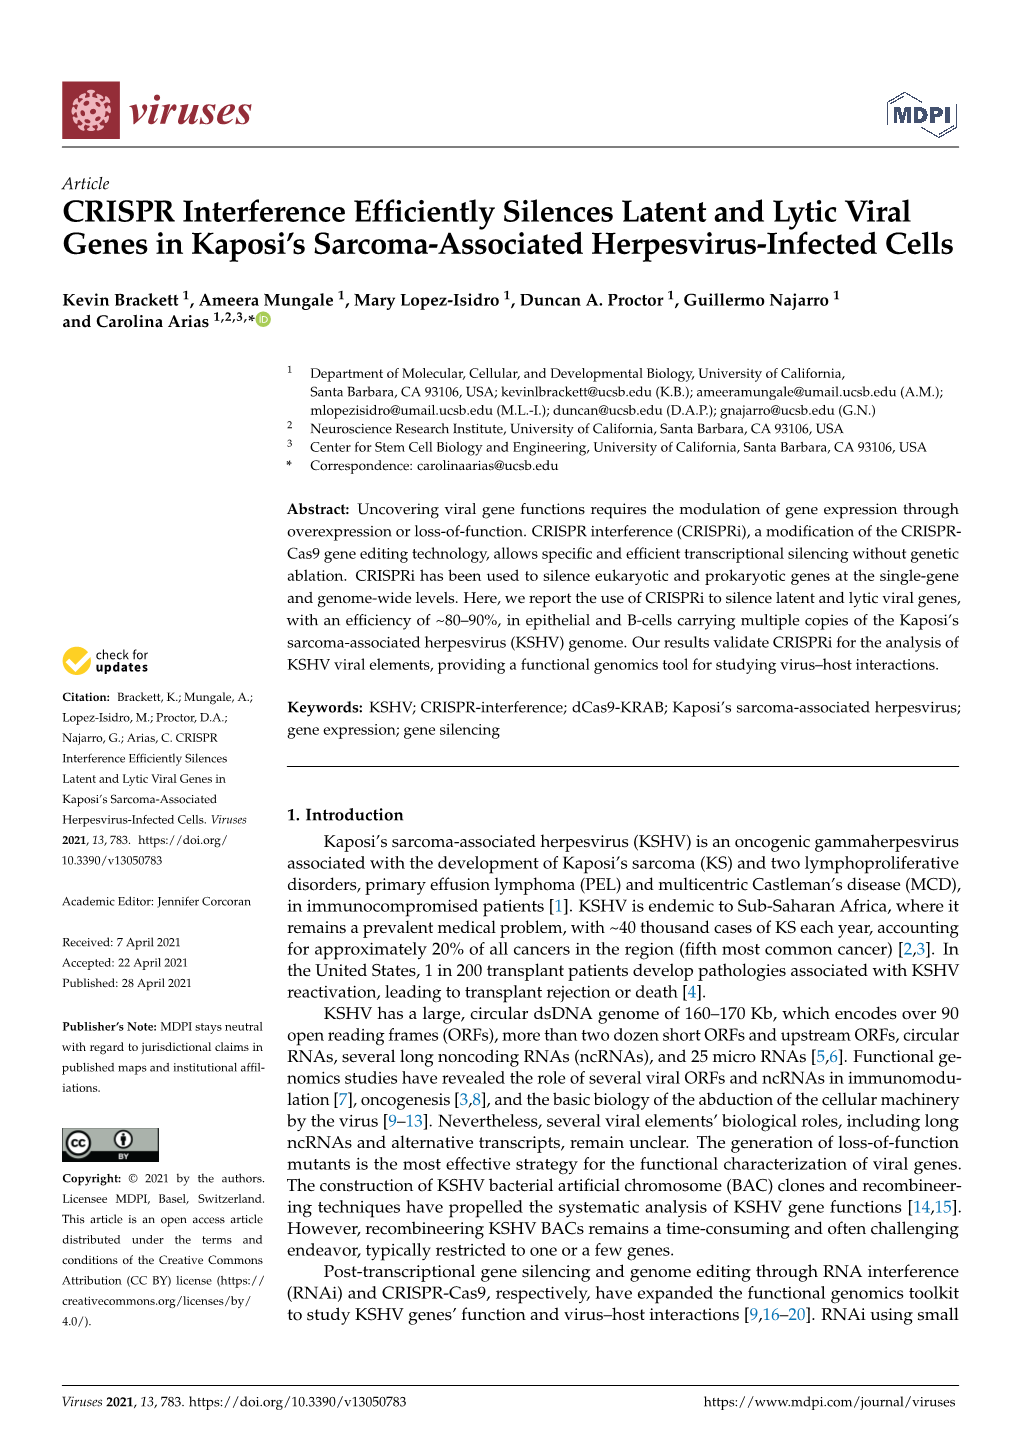 CRISPR Interference Efficiently Silences Latent and Lytic Viral Genes in Kaposi’S Sarcoma-Associated Herpesvirus-Infected Cells